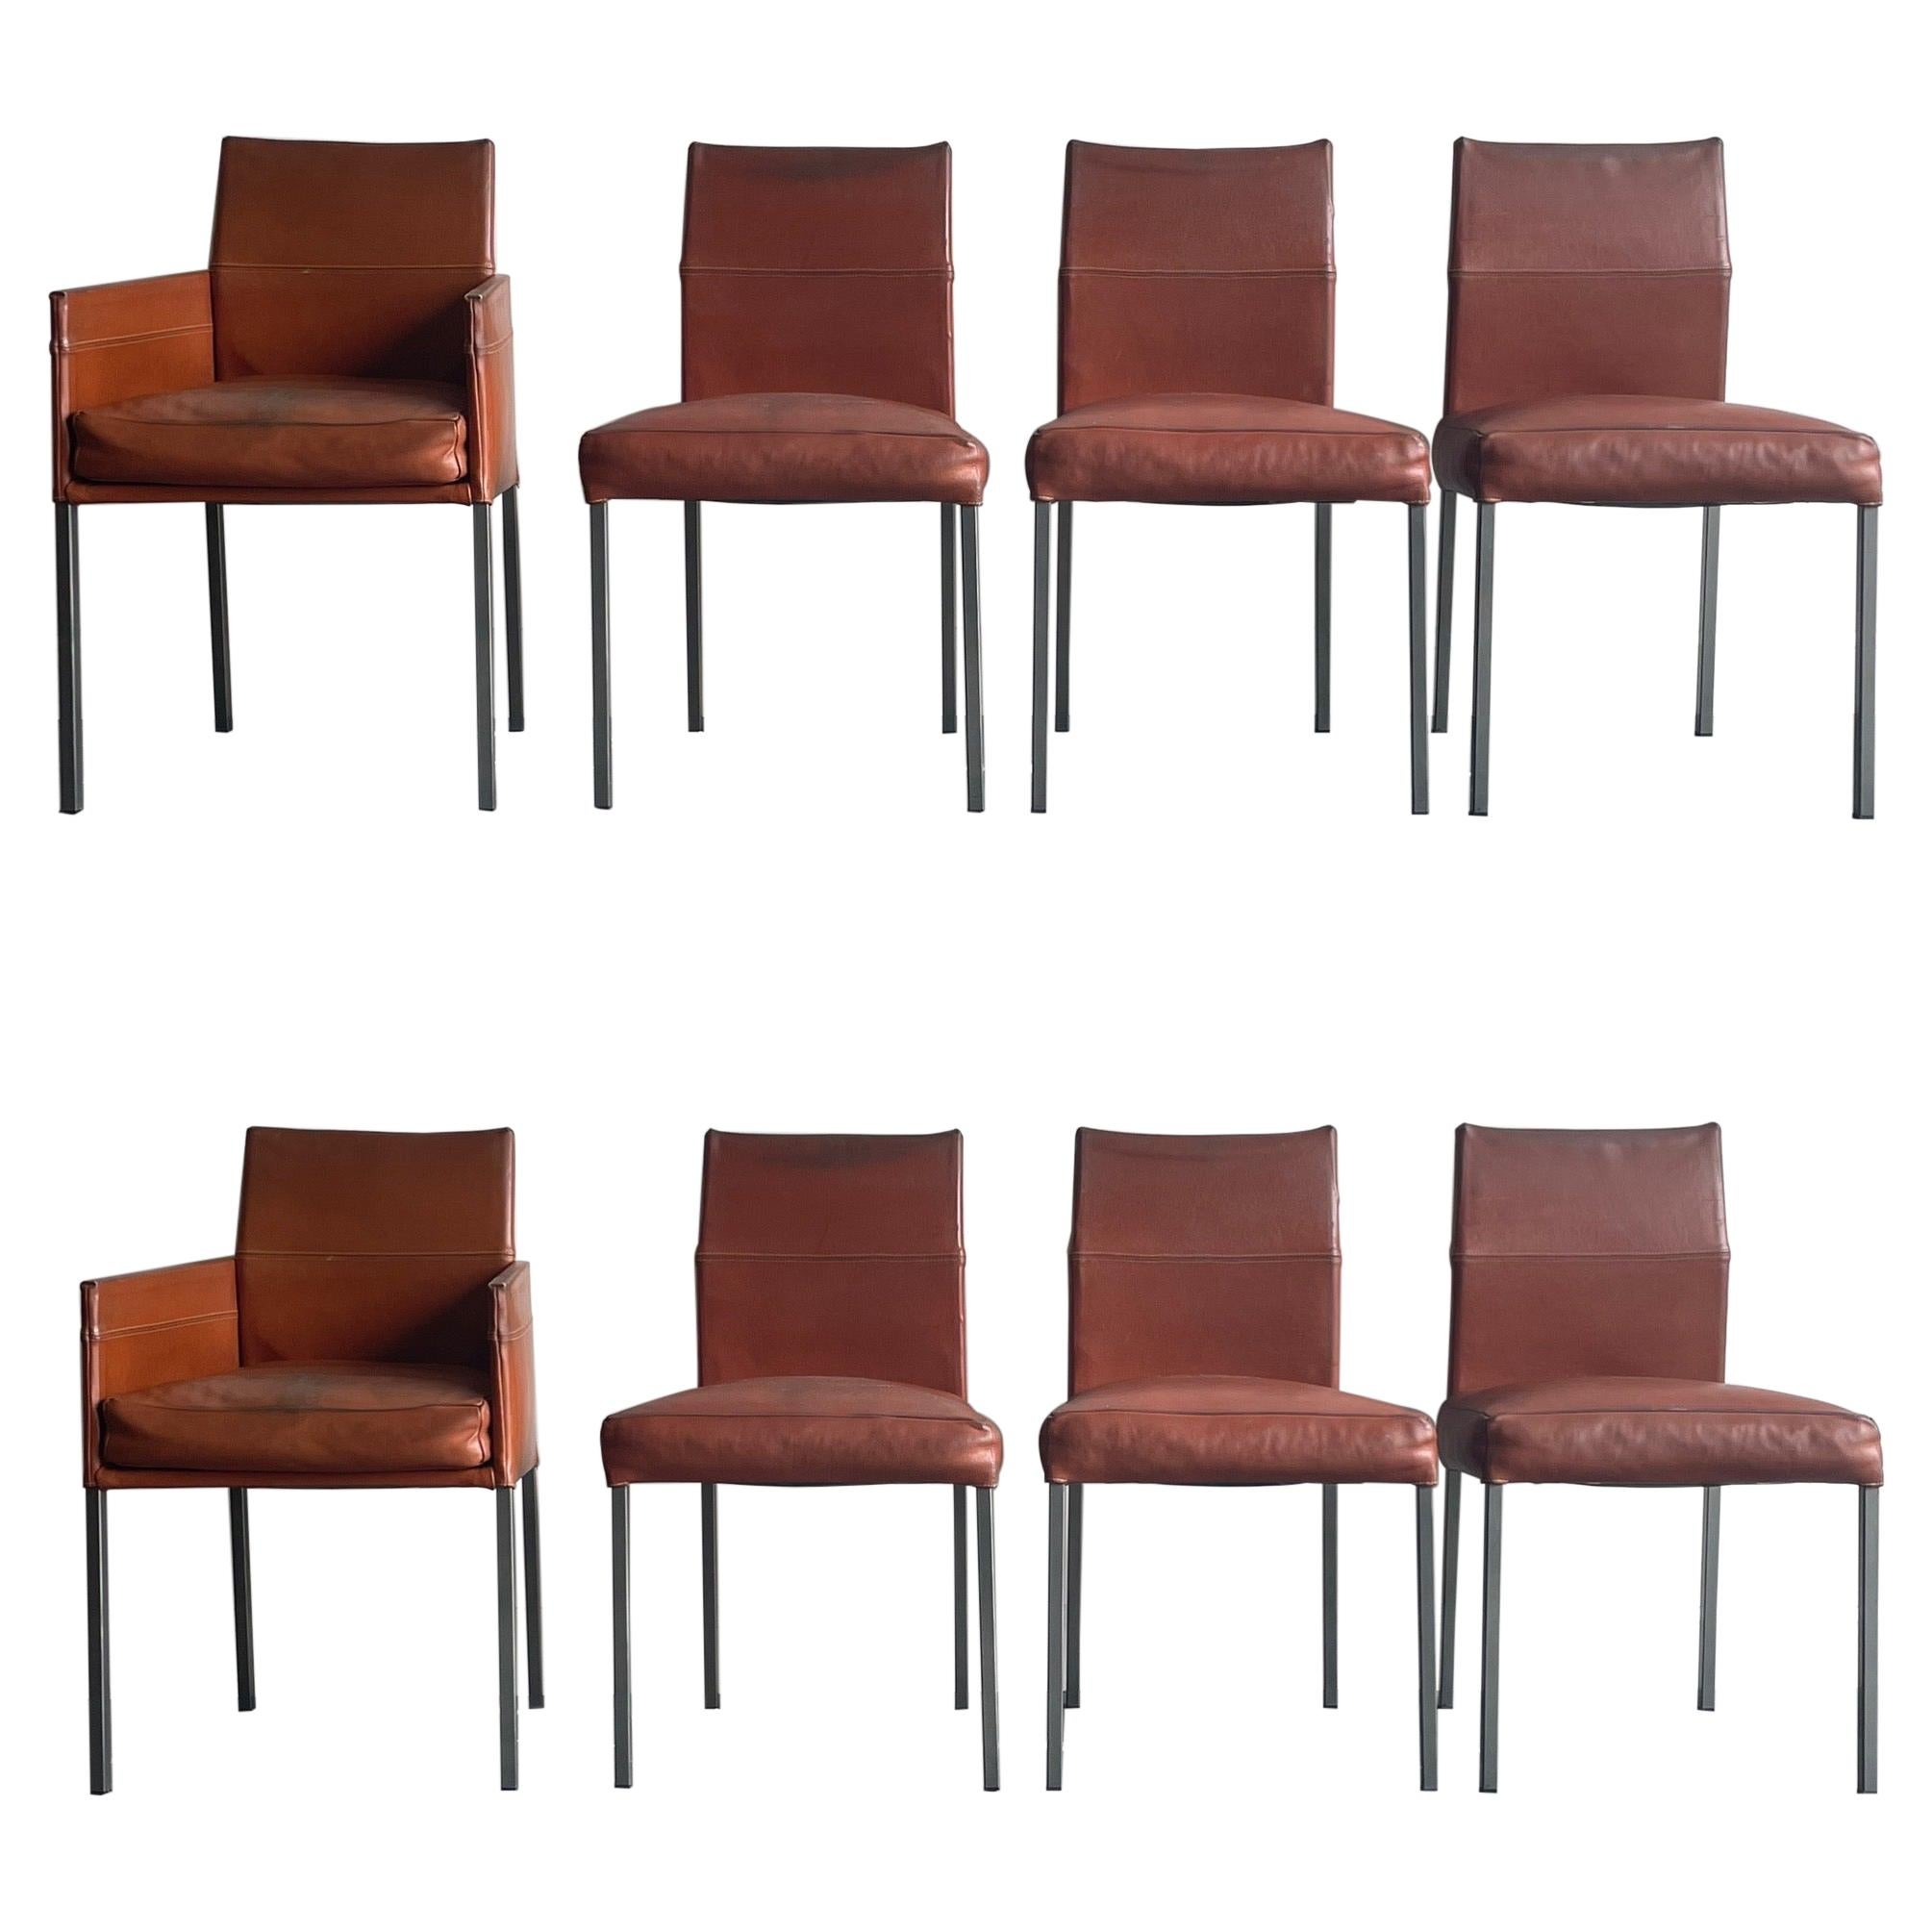 Karl Friedrich Förster 'KFF' Texas and Antica Dining Chairs, Leather and Metal